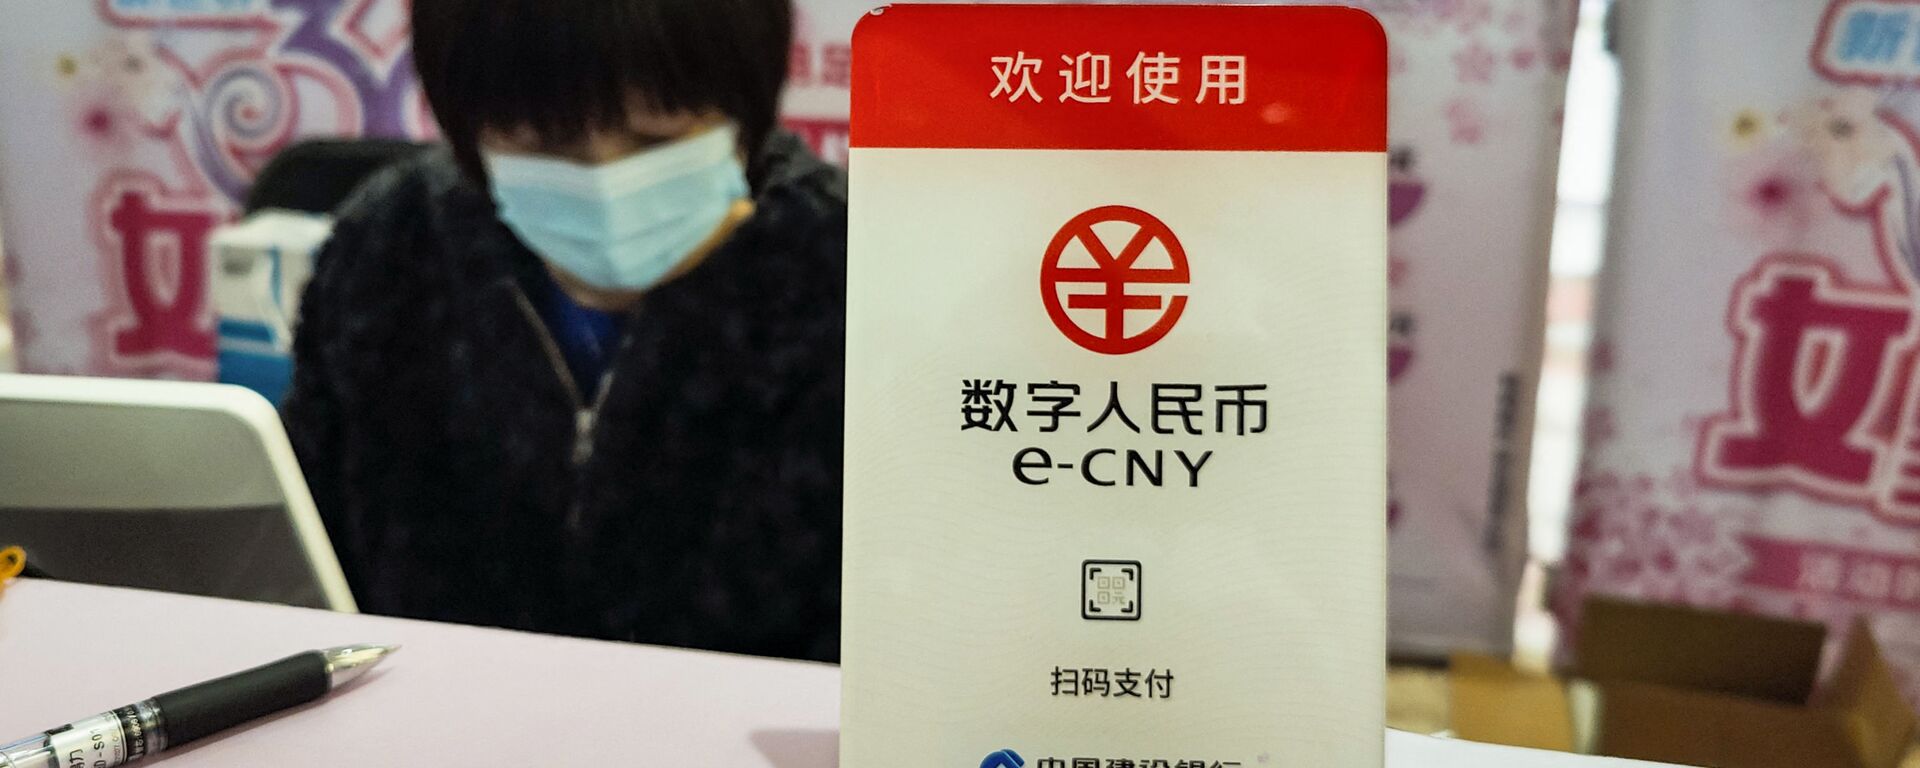 A sign for China’s new digital currency, electronic Chinese yuan (e-CNY) is displayed at a shopping mall in Shanghai on March 8, 2021 - Sputnik International, 1920, 11.11.2021